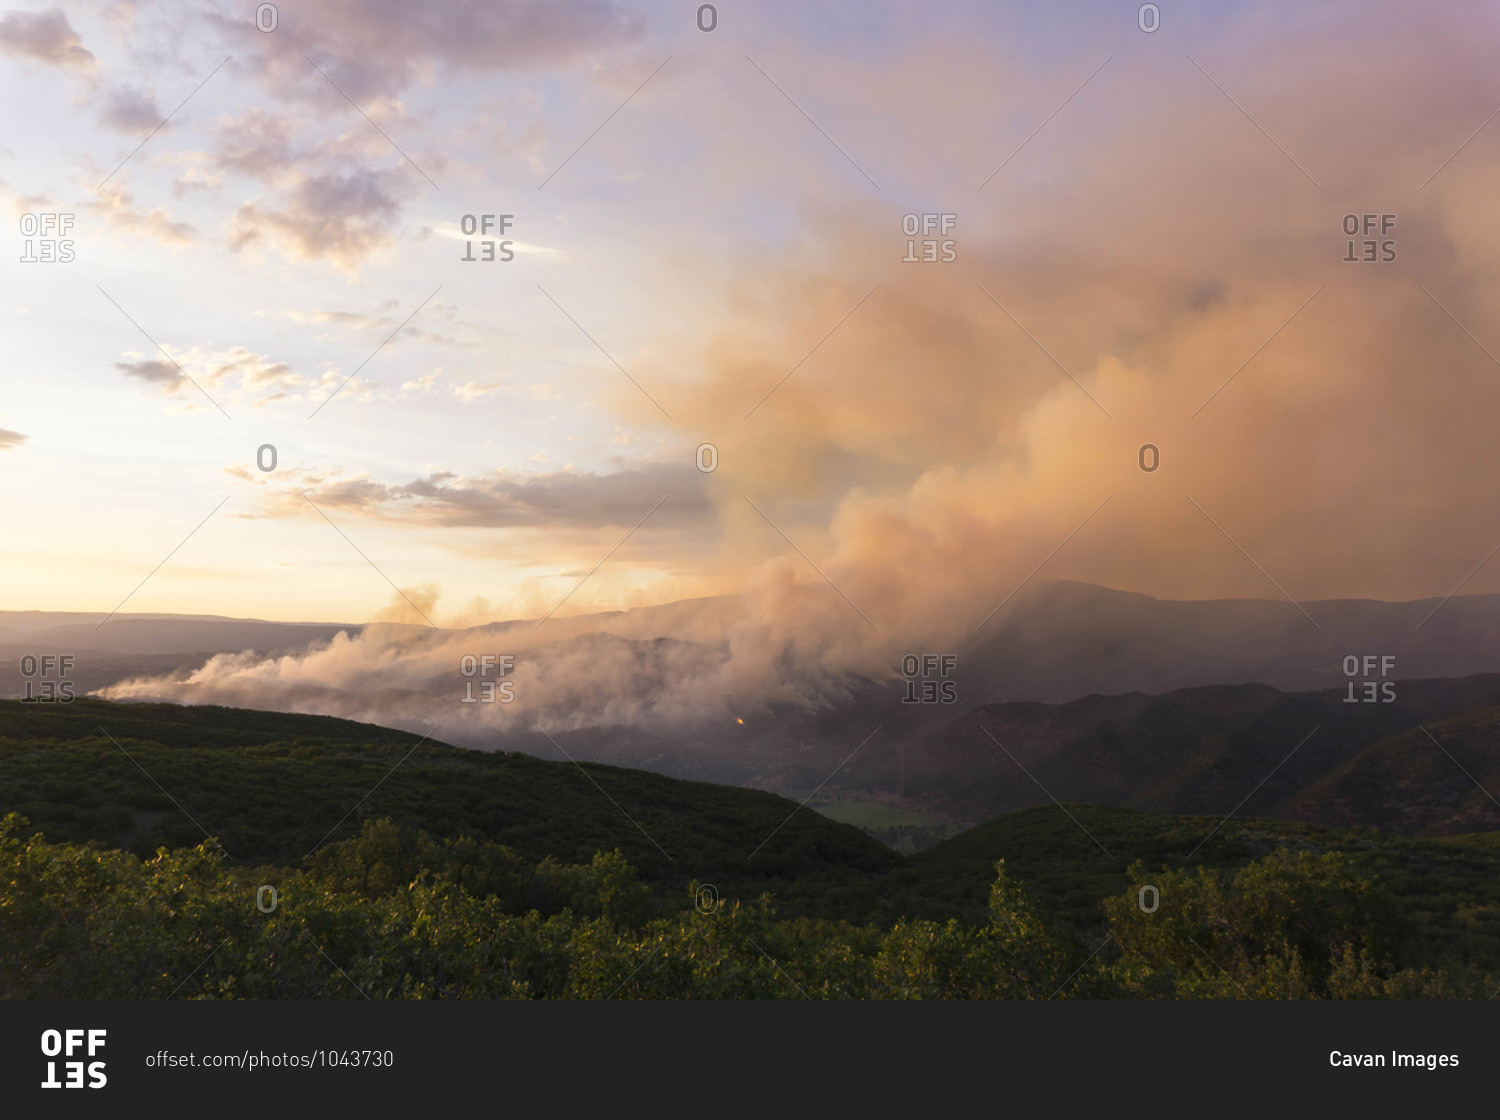 Smoke emitting from wildfire on mountain against sky